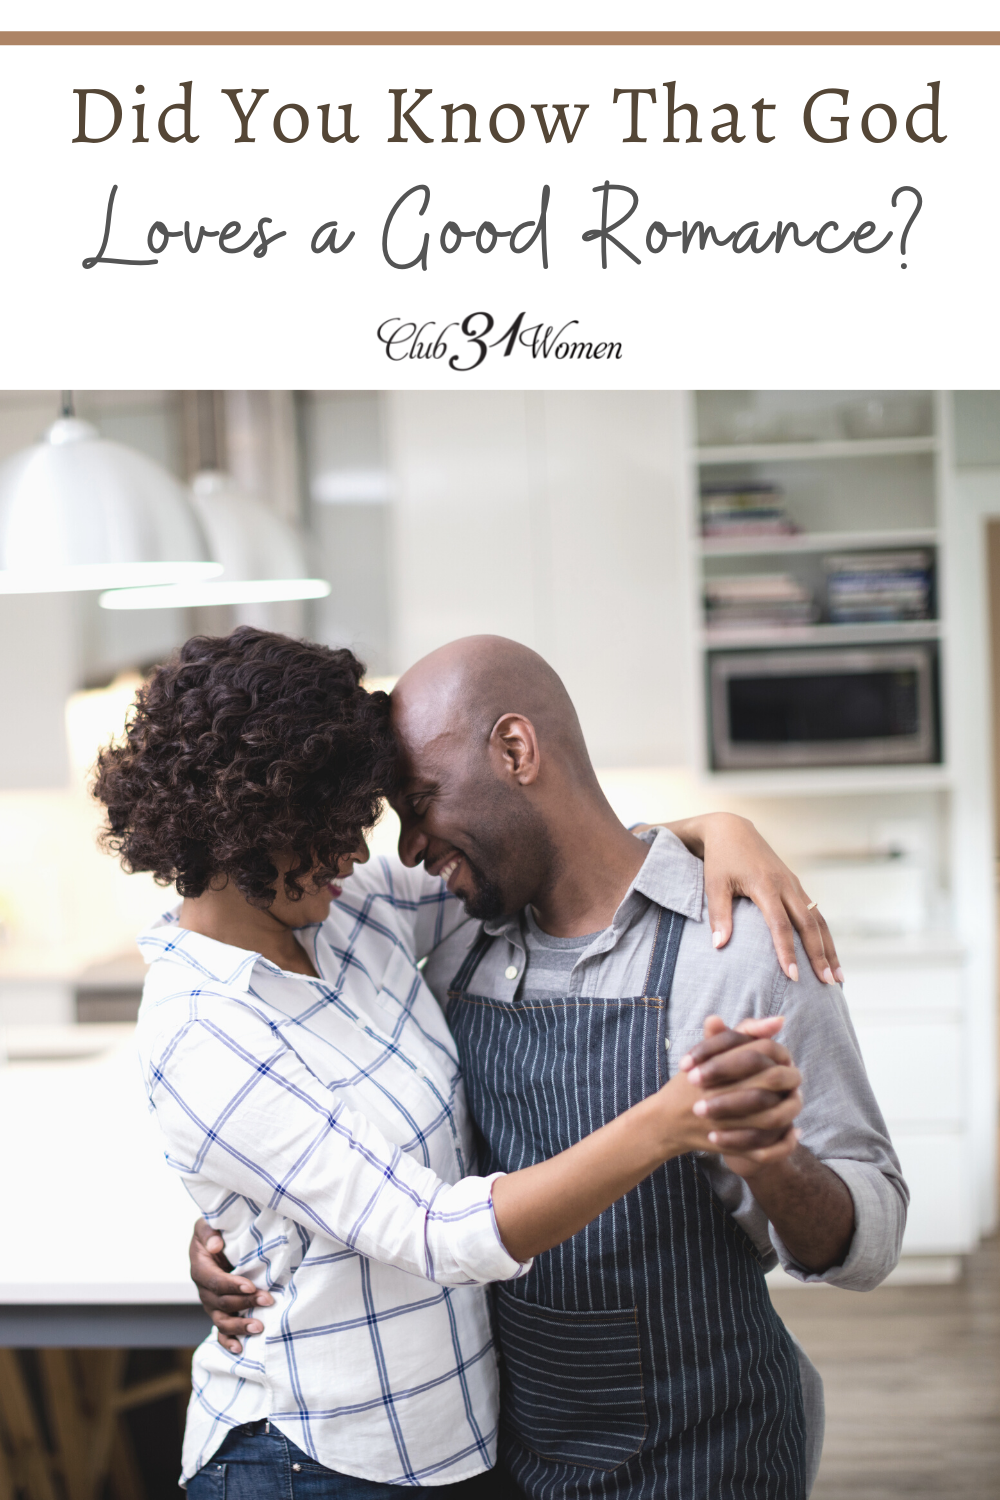 Romance doesn't have to fade. You can be intentional about keeping romance alive and can choose to be romanced in return. via @Club31Women